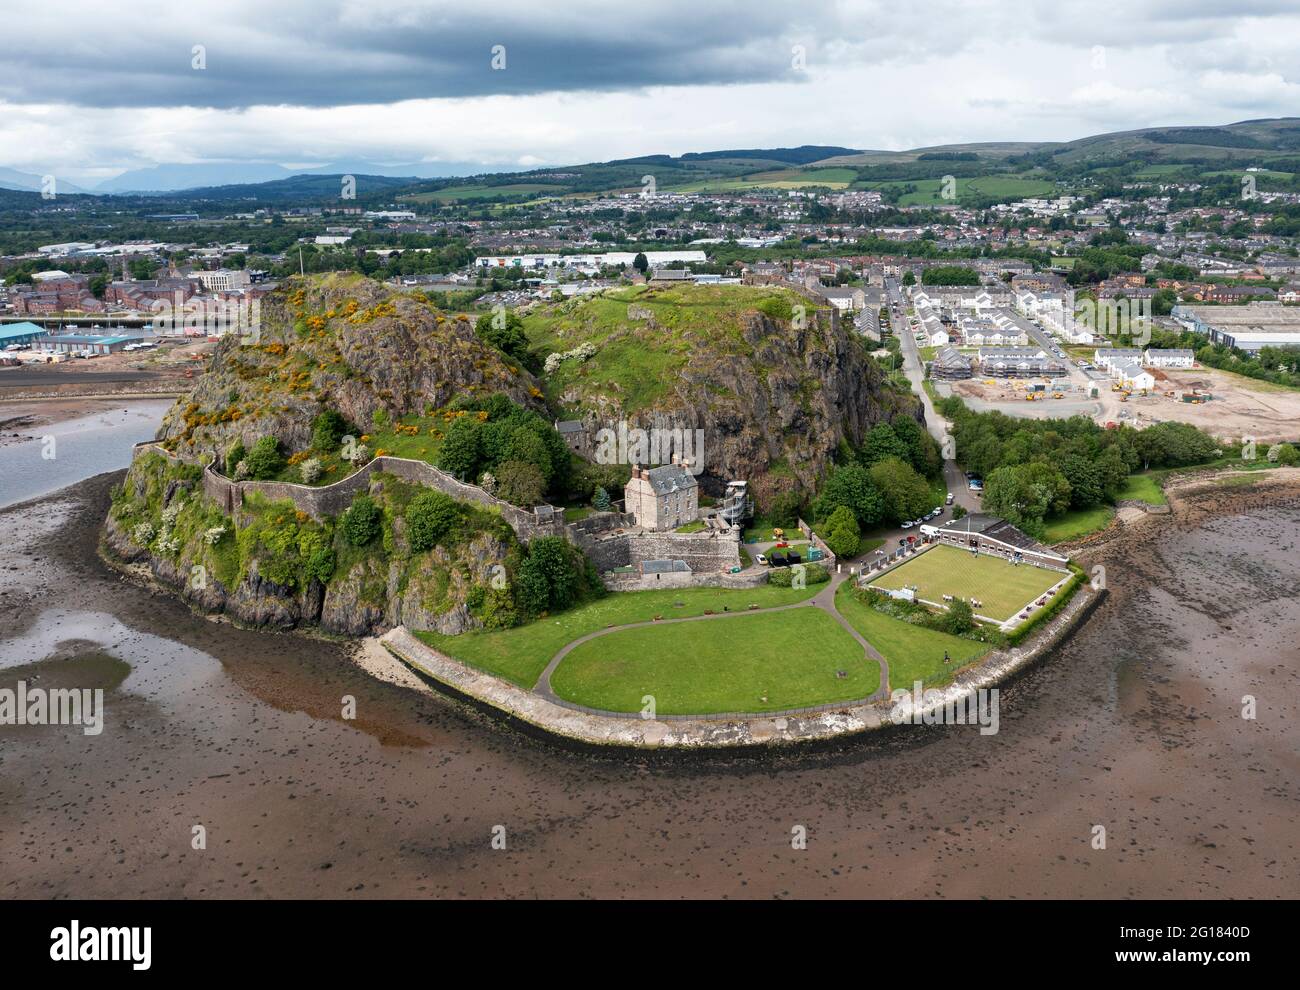 Aerial view of Dumbarton Castle and Dumbarton Rock on the banks of the River Clyde, West Dumbartonshire. Dumbarton Rock Bowling club is bottom right. Stock Photo